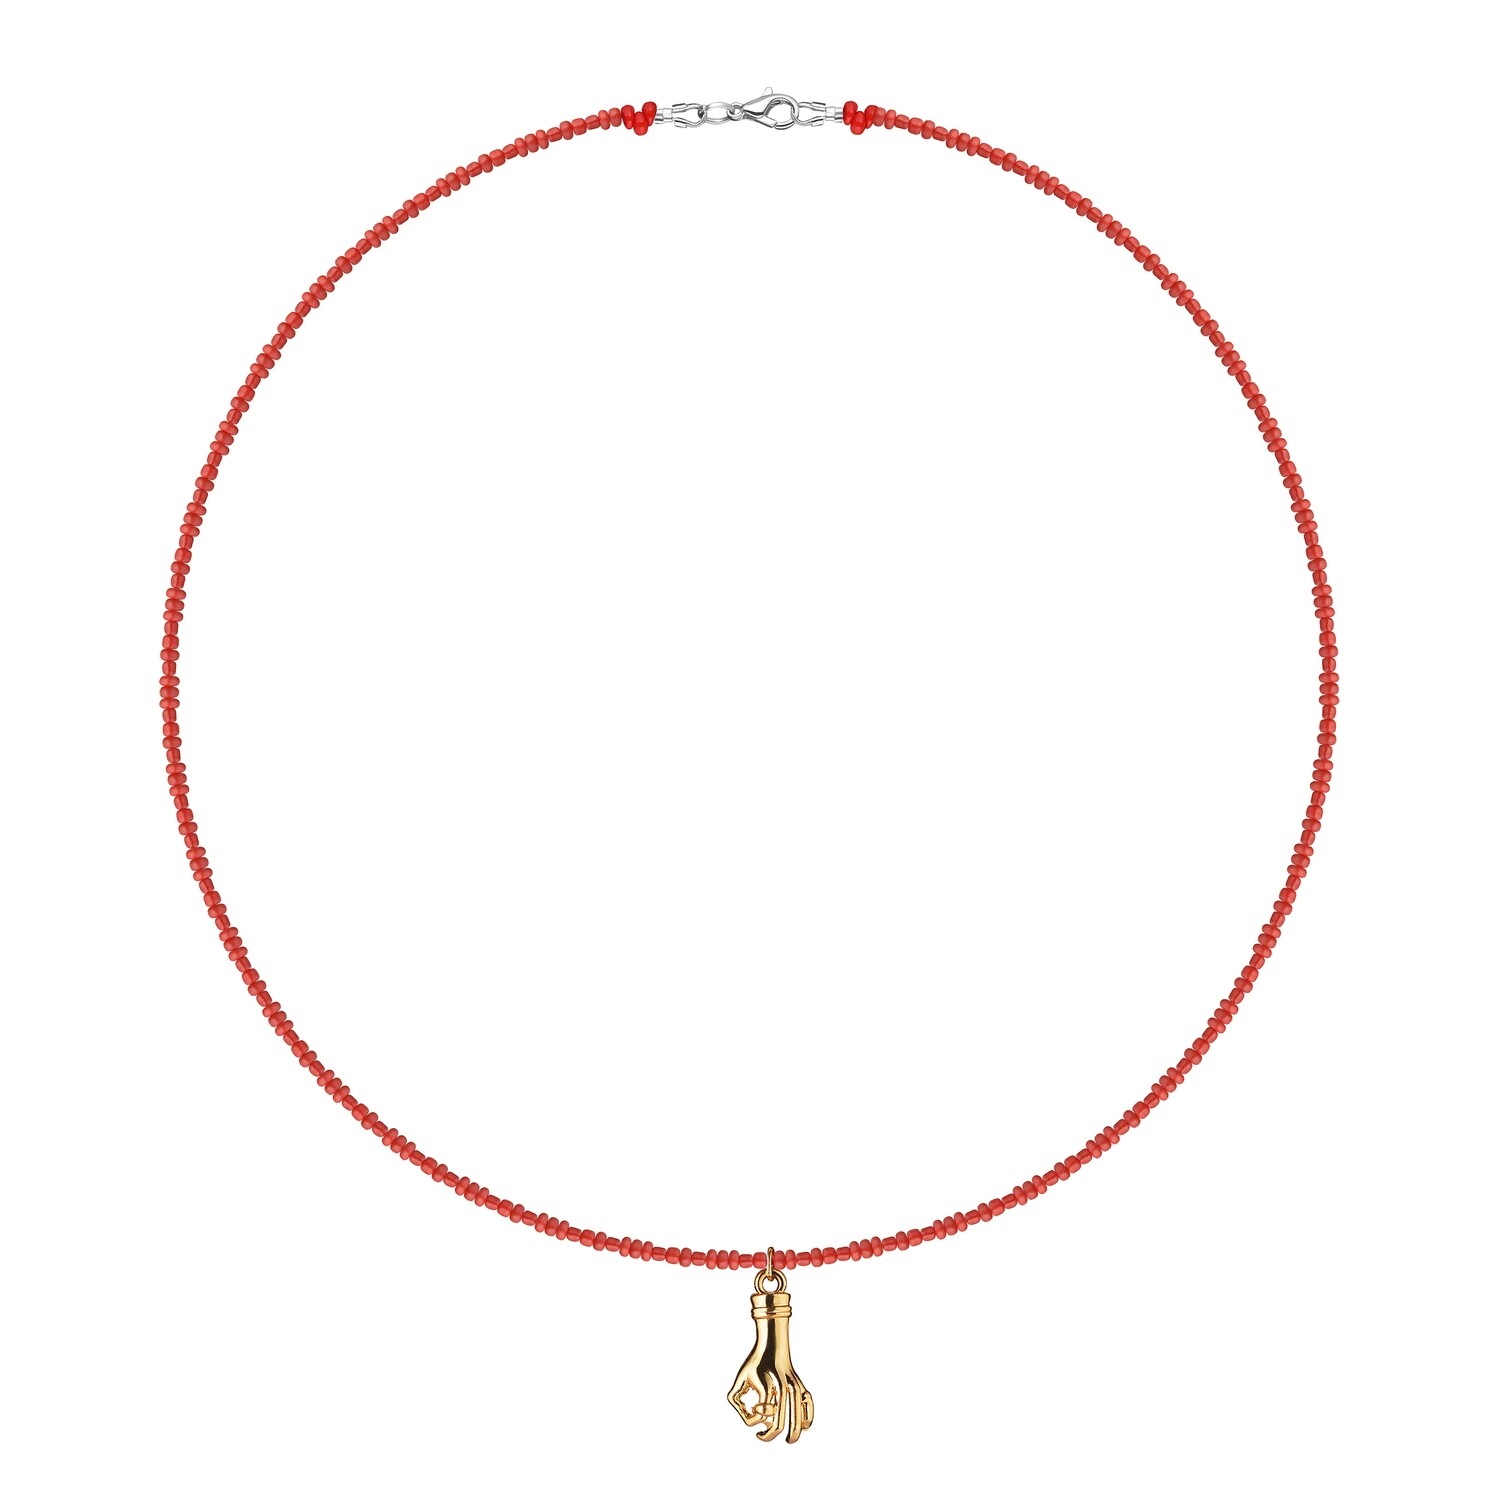 Red Beads Necklace with Hand Pendant